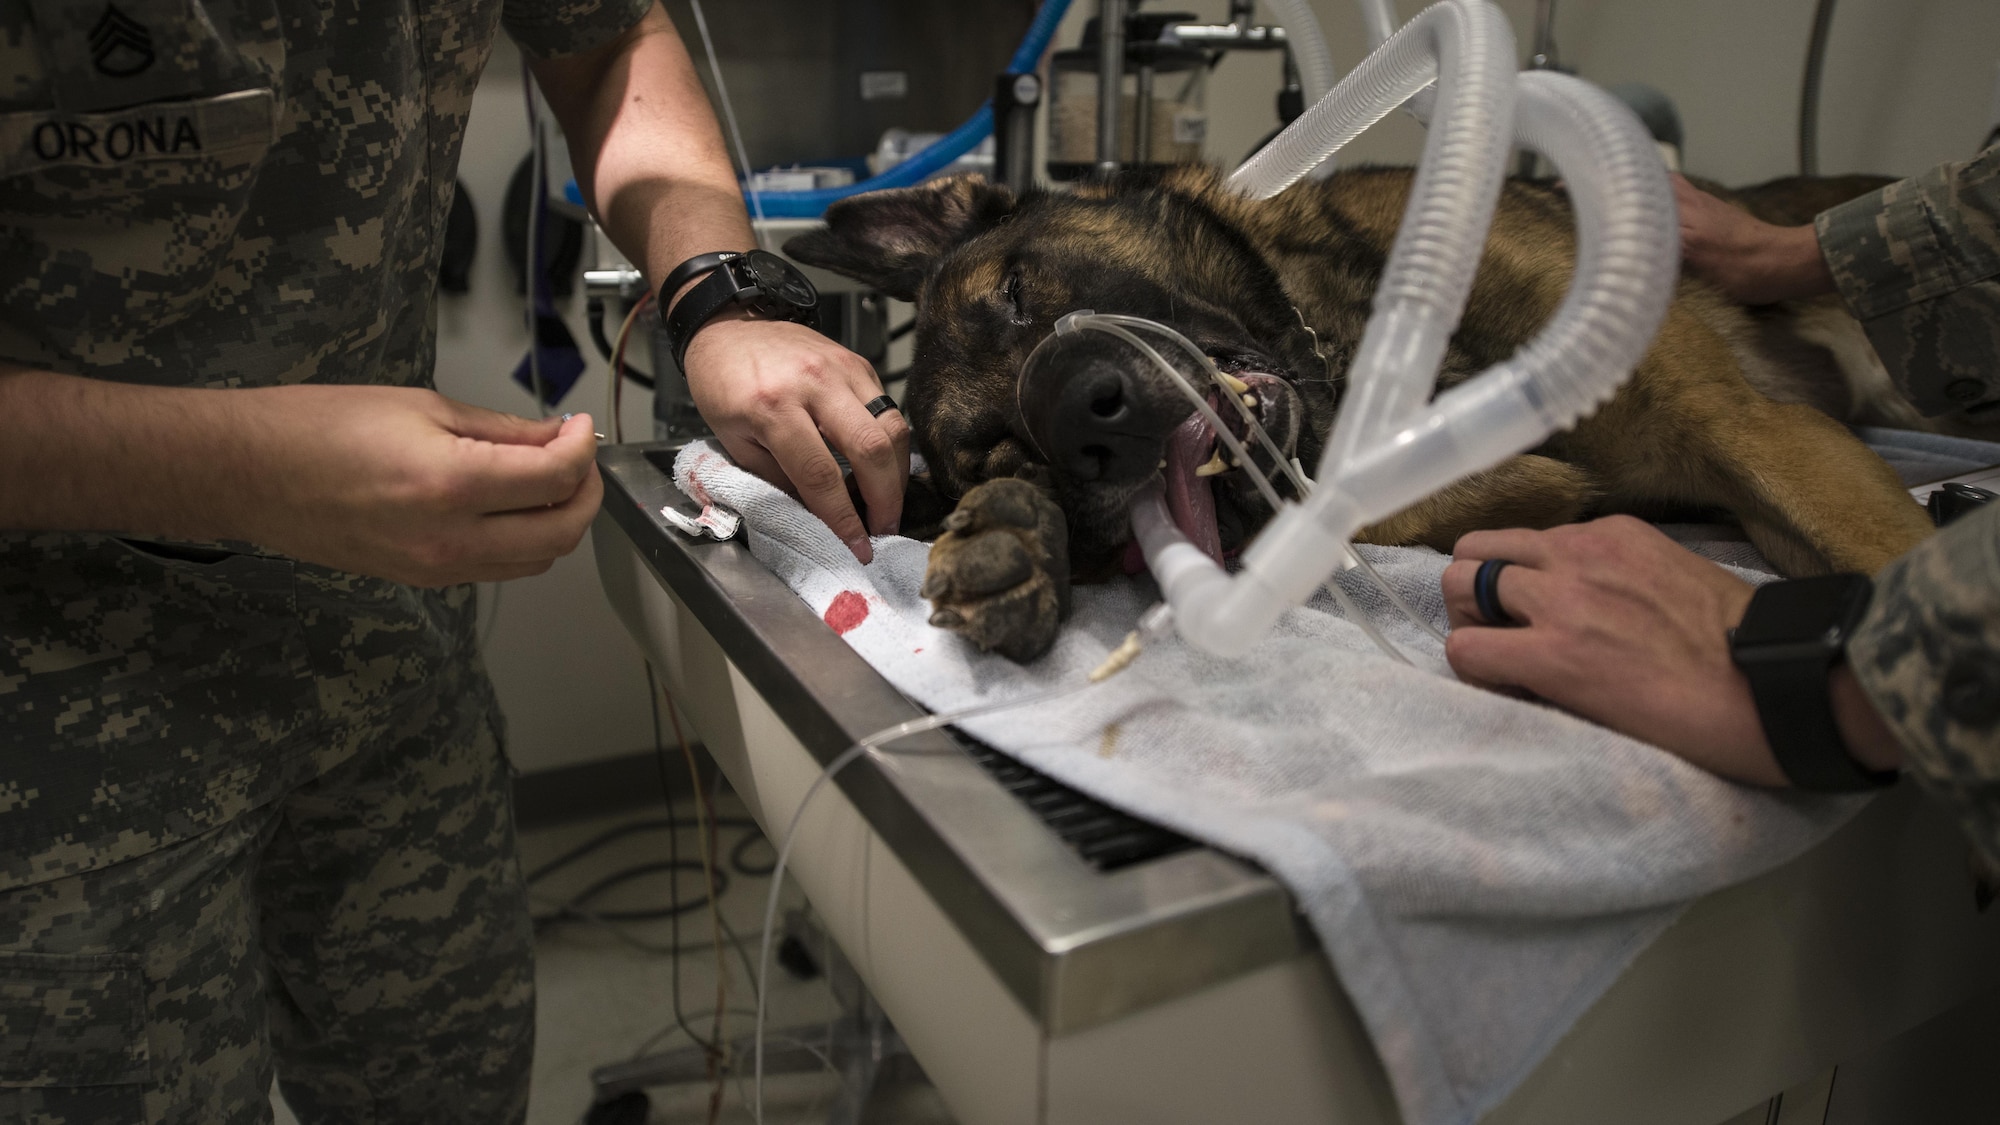 Dylan, a military working dog with the 49th Security Forces Squadron, is placed onto a metal table and anesthetized, for a routine dental cleaning at the veterinary clinic at Holloman Air Force Base, N.M. Dec. 13, 2016. Holloman’s MWDs are anesthetized during dental cleanings for comfort and safety purposes. (U.S. Air Force photo by Airman 1st Class Alexis P. Docherty)

